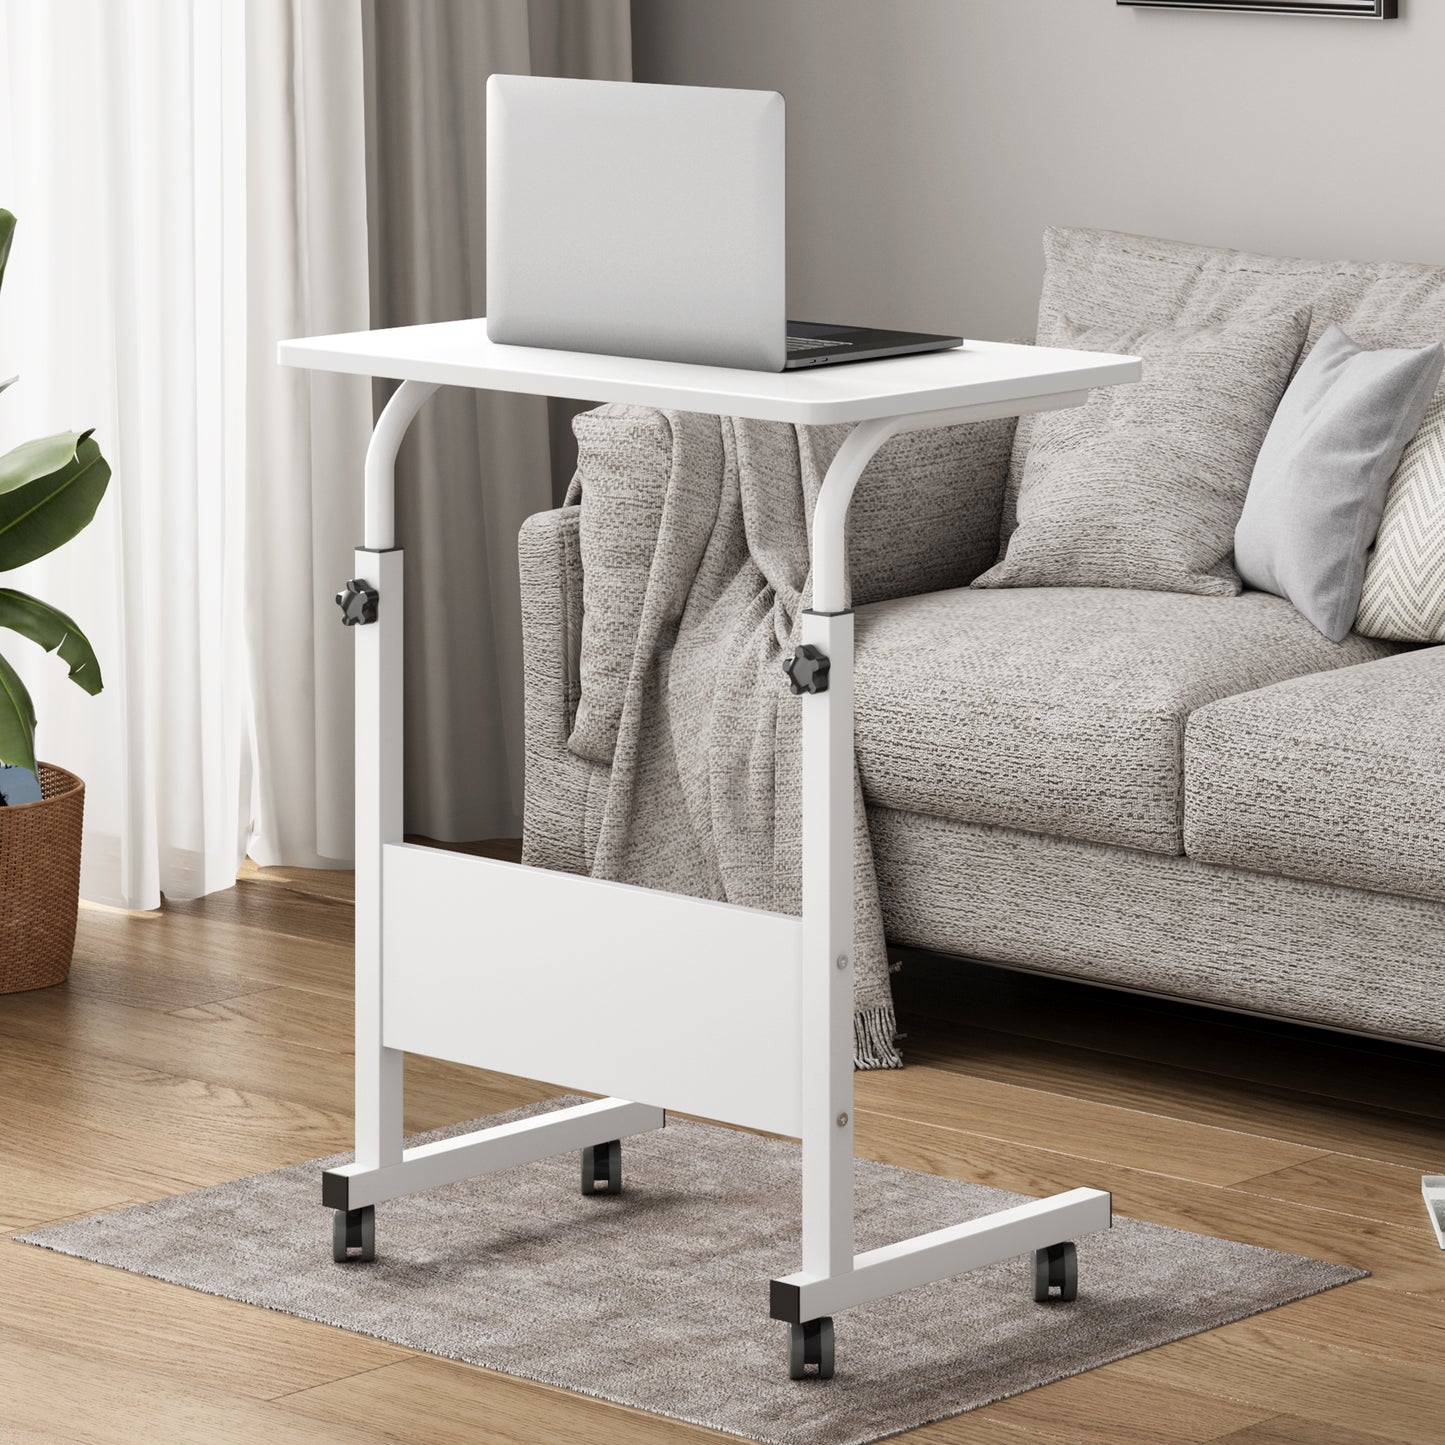 SogesPower Standing Computer Desk with Wheels, Movable Side Desk, Sitting Desk Height Adjustable- White